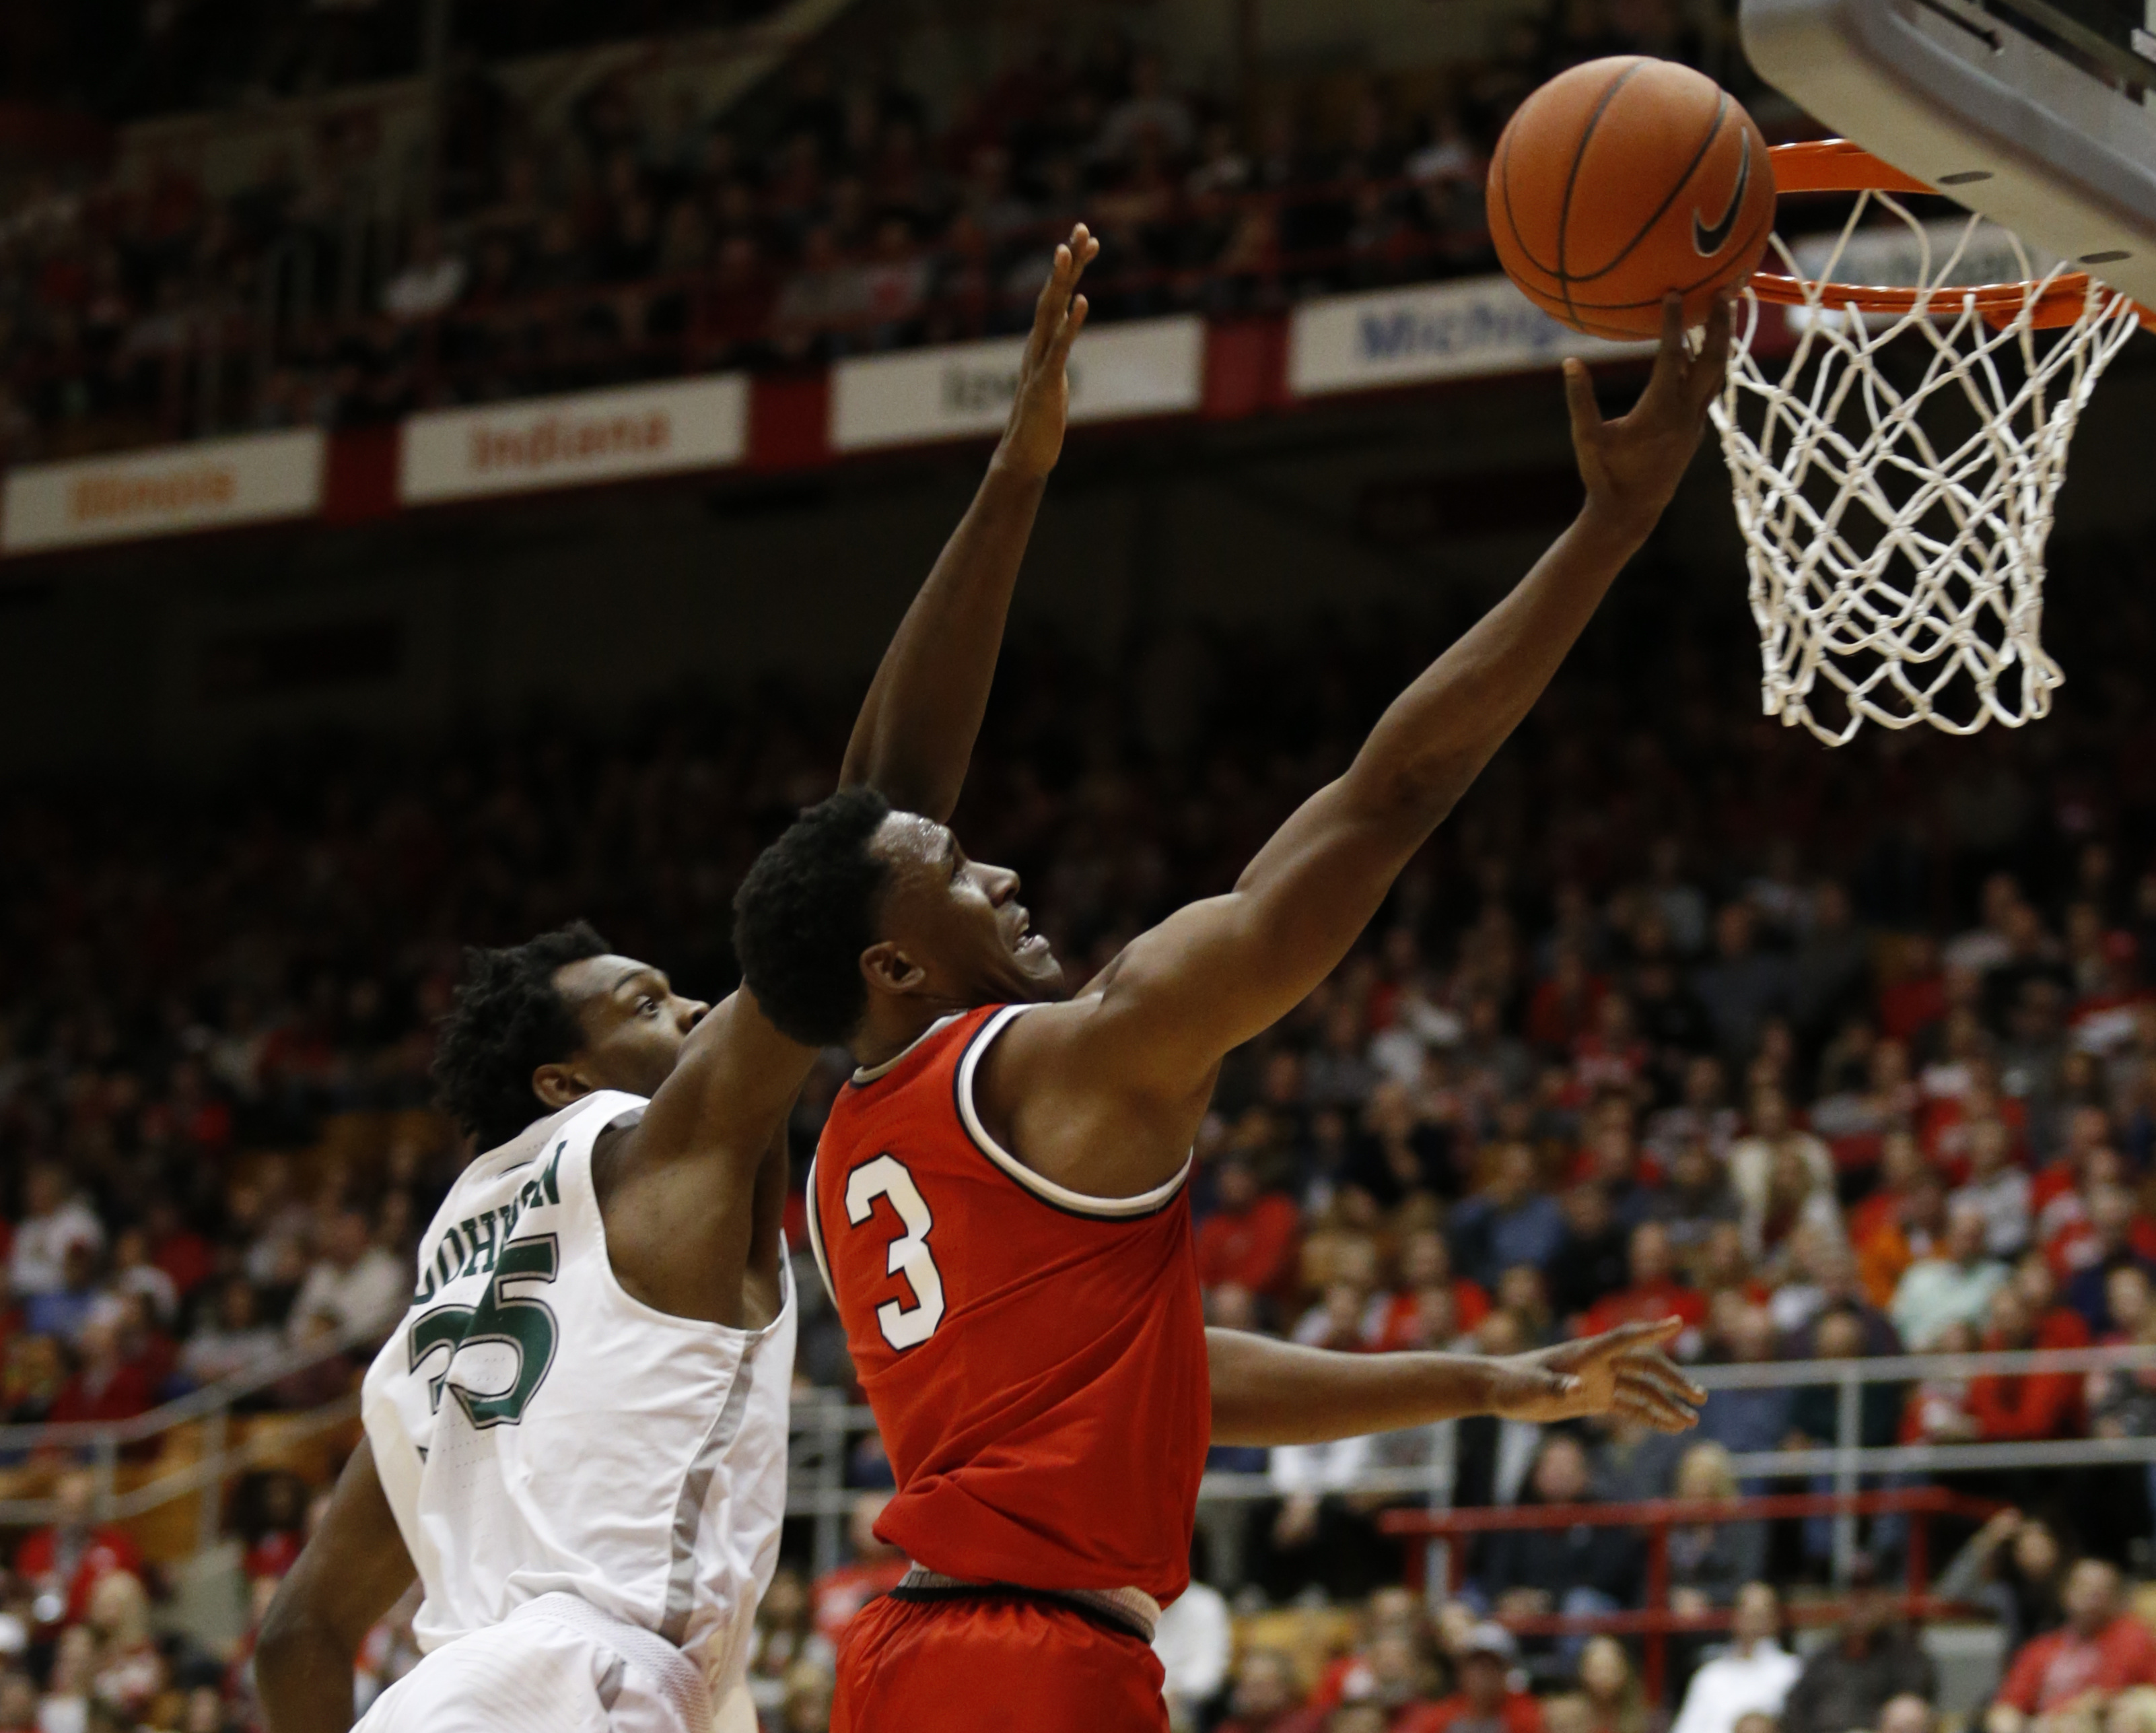 No. 23 Ohio State pulls away to rout Cleveland State 89-62